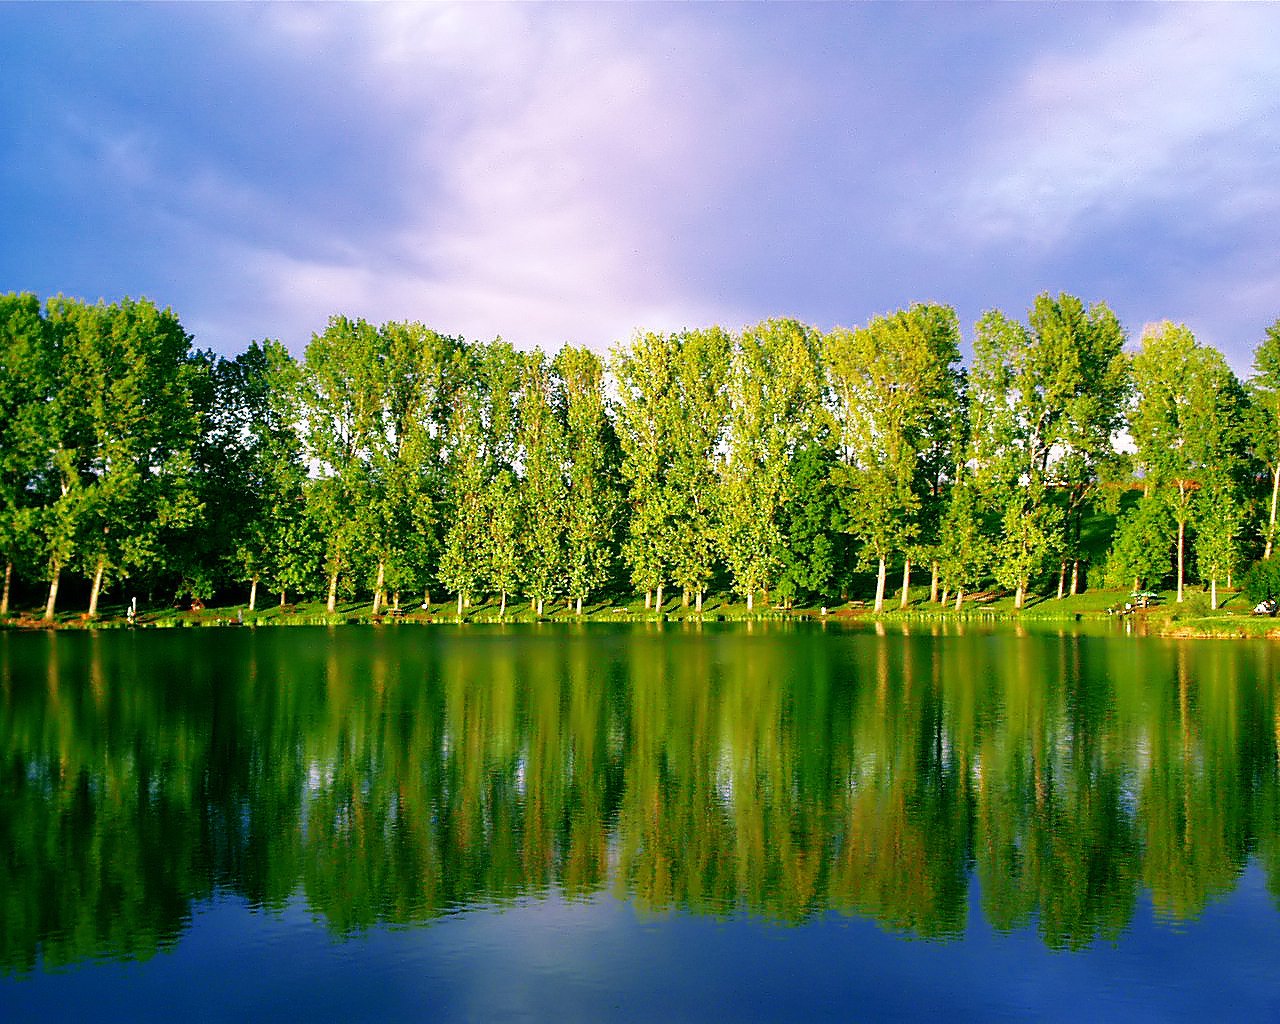 trees reflected on a lake surrounded by a forest